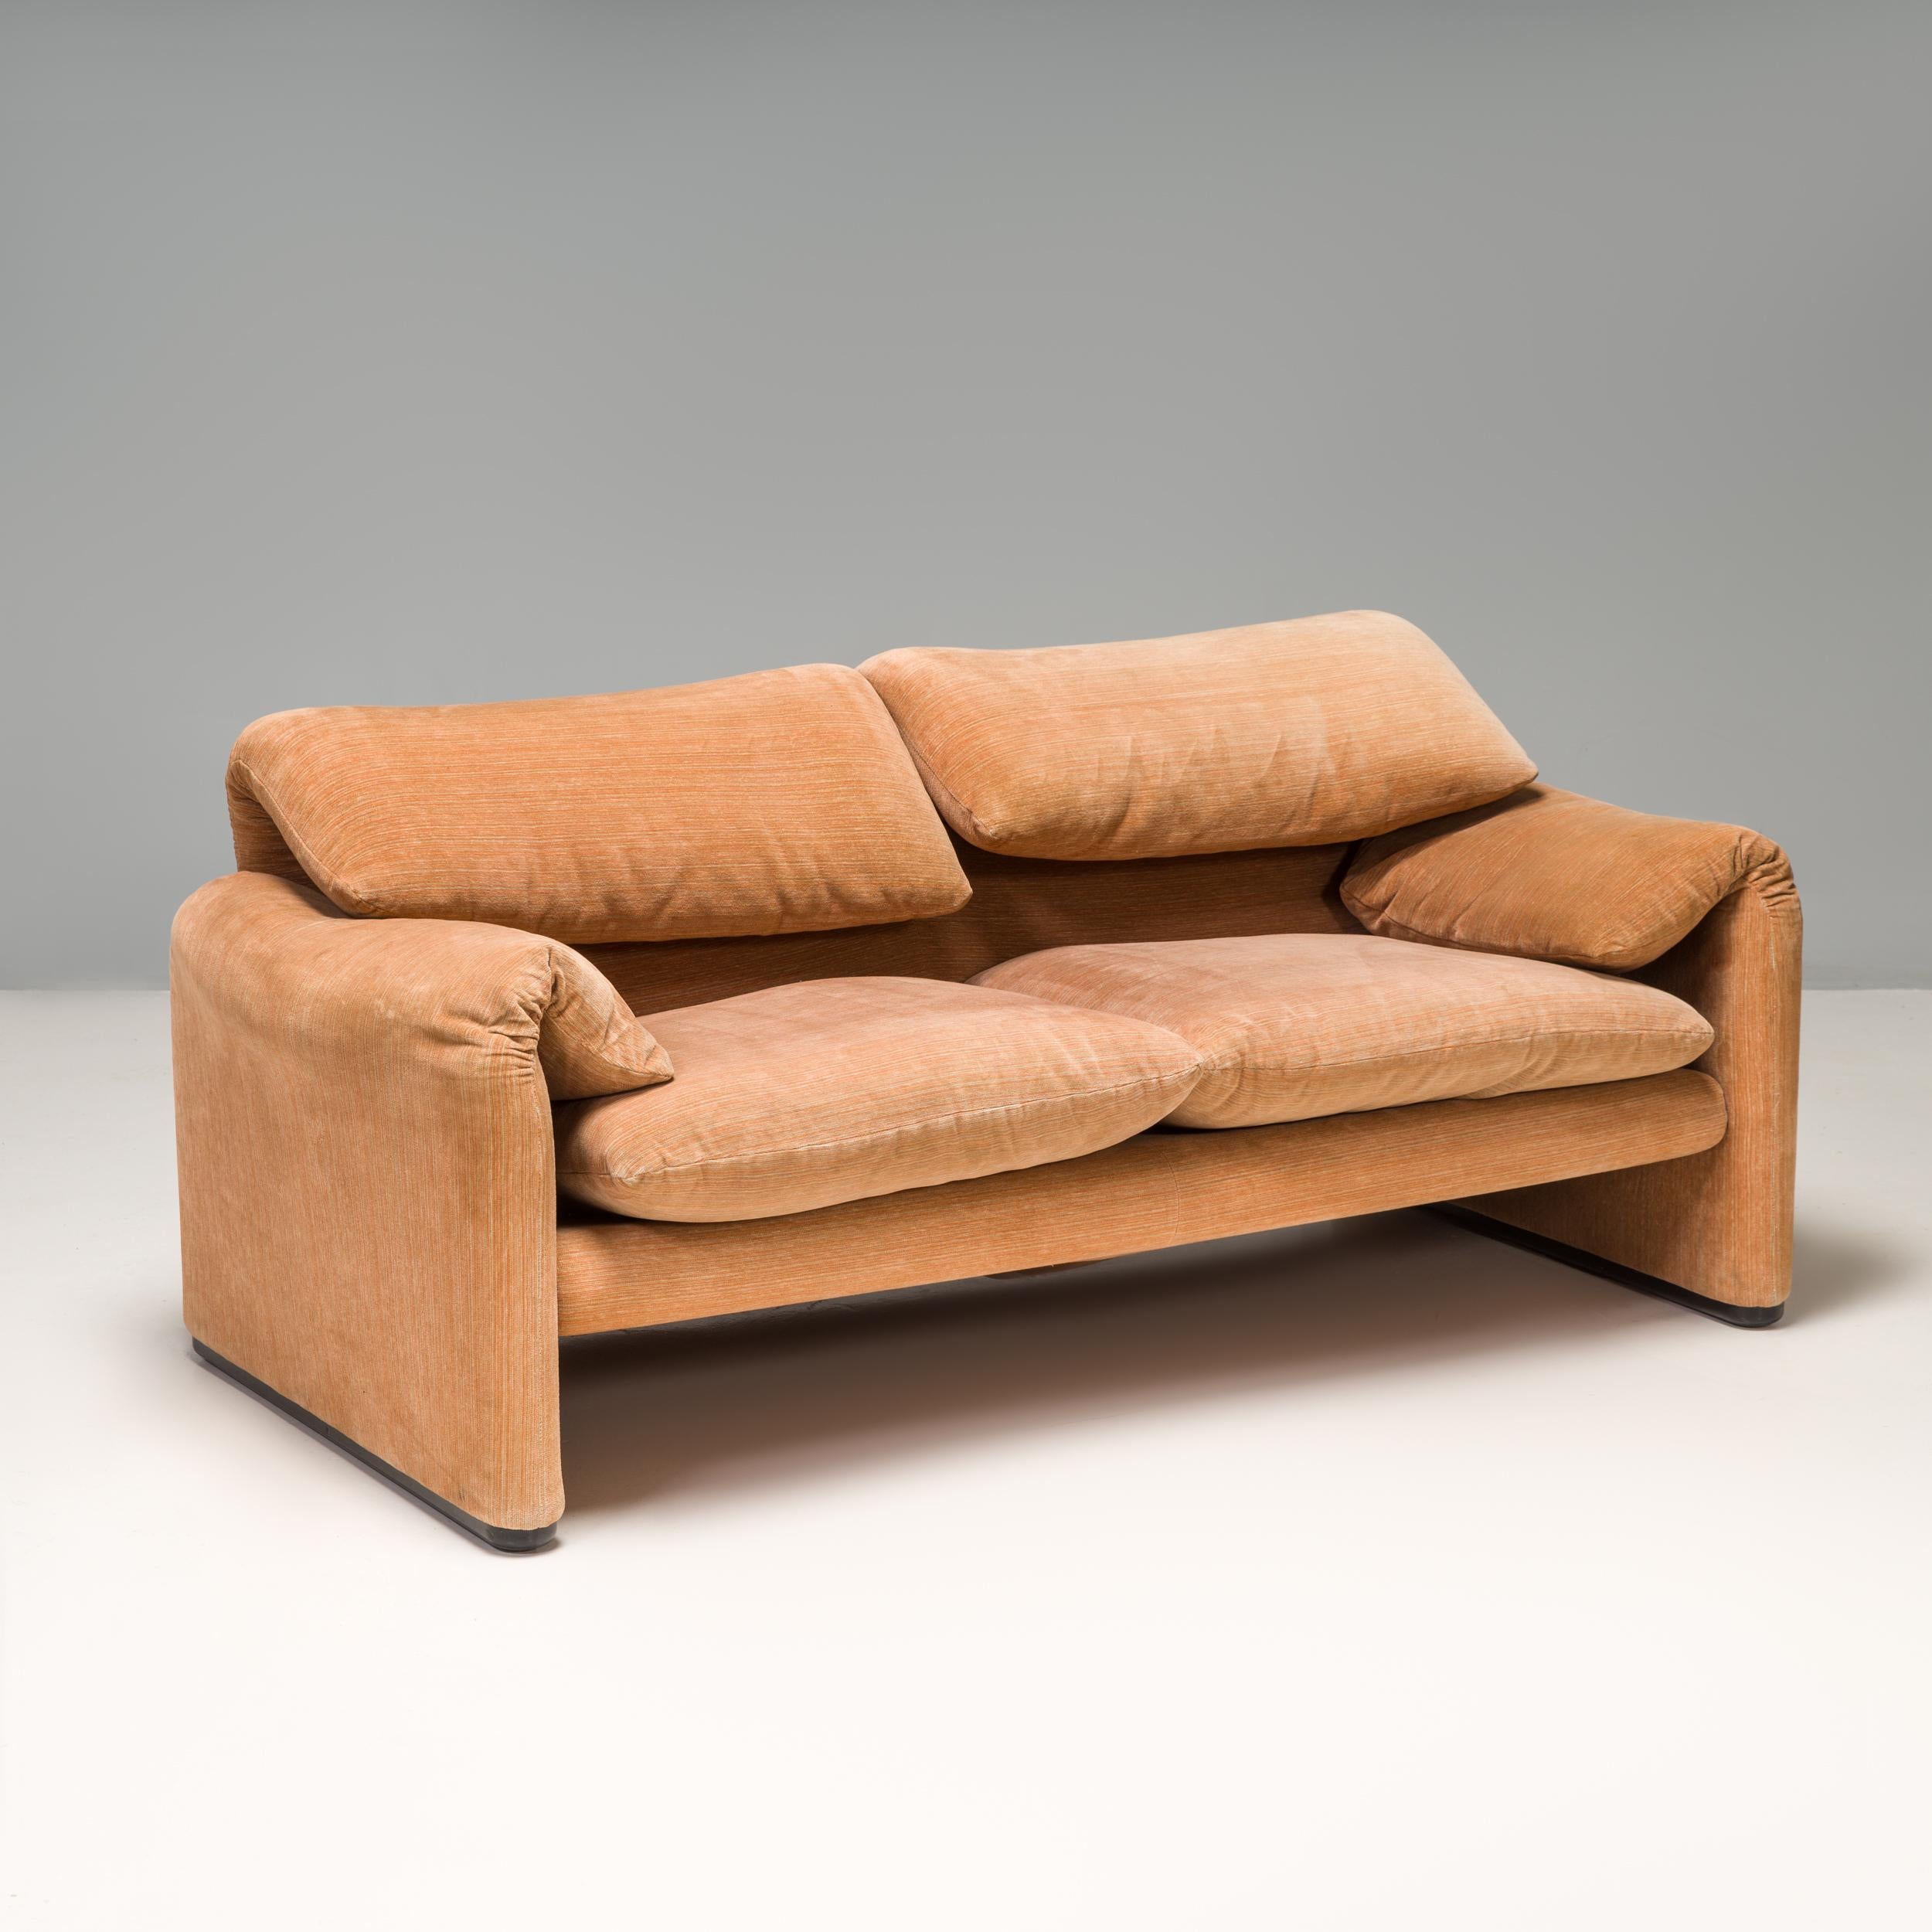 Originally designed by Vico Magistretti for Cassina in 1973, the Maralunga sofa has become a true design icon.

Upholstered in soft textured tan fabric, the sofa features the signature adjustable headrests and folded armrests, while two separate